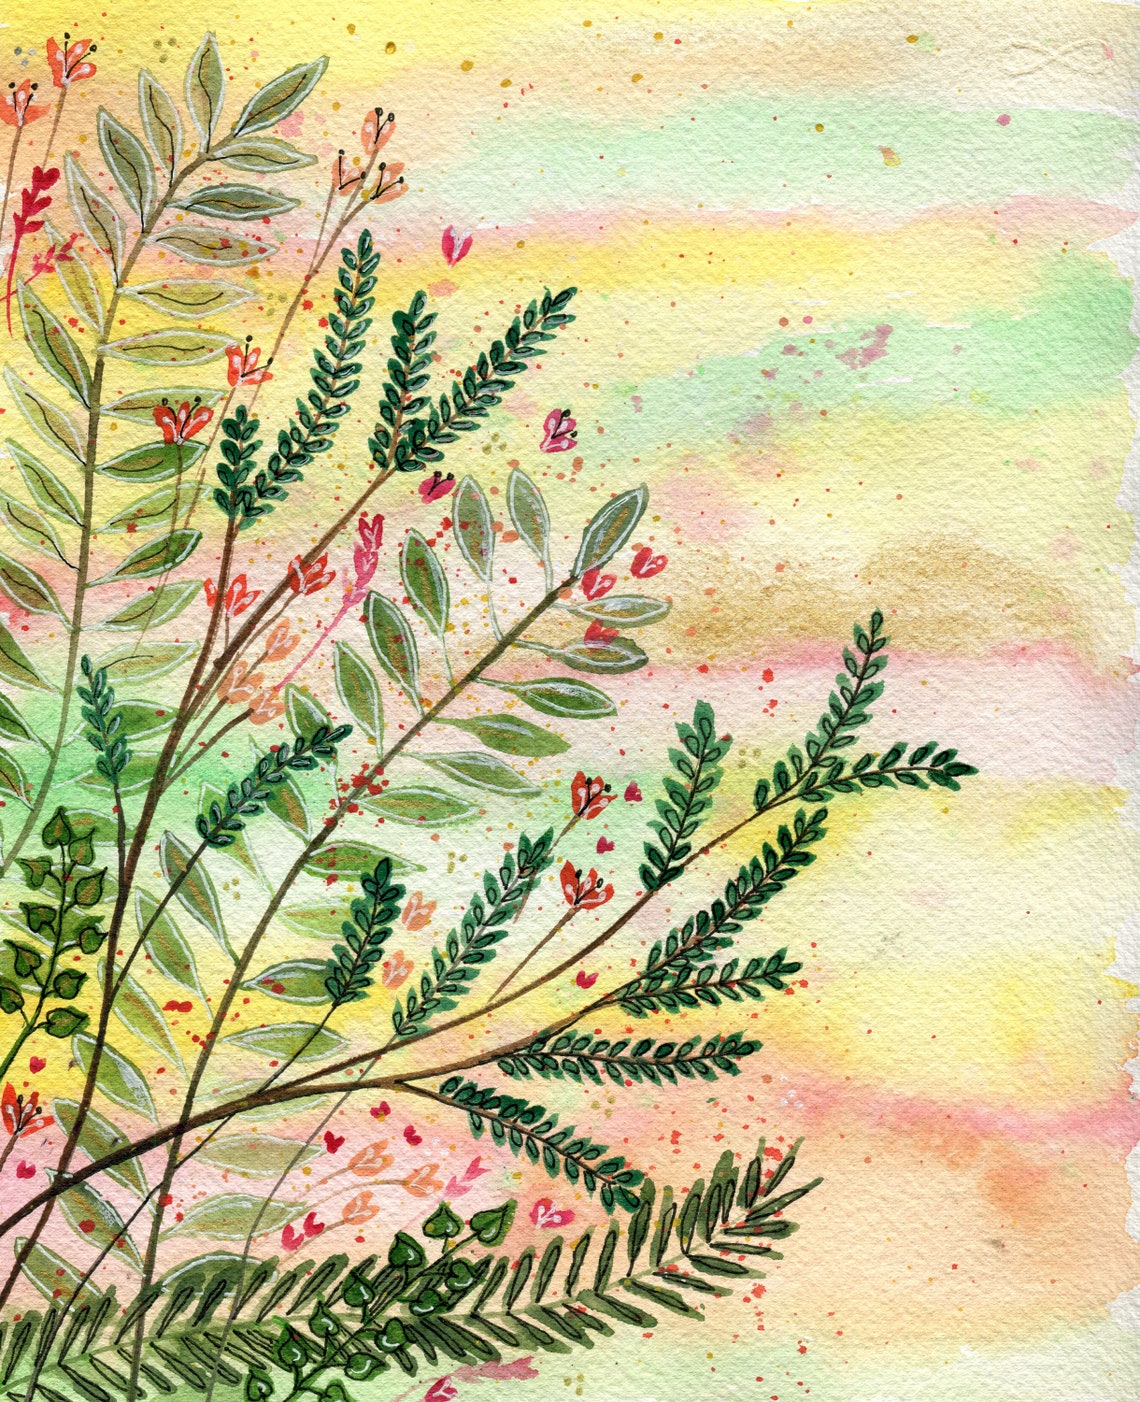 Reaching for the sun - original watercolour painting of whimsical flowers and leaves on a yellow sky